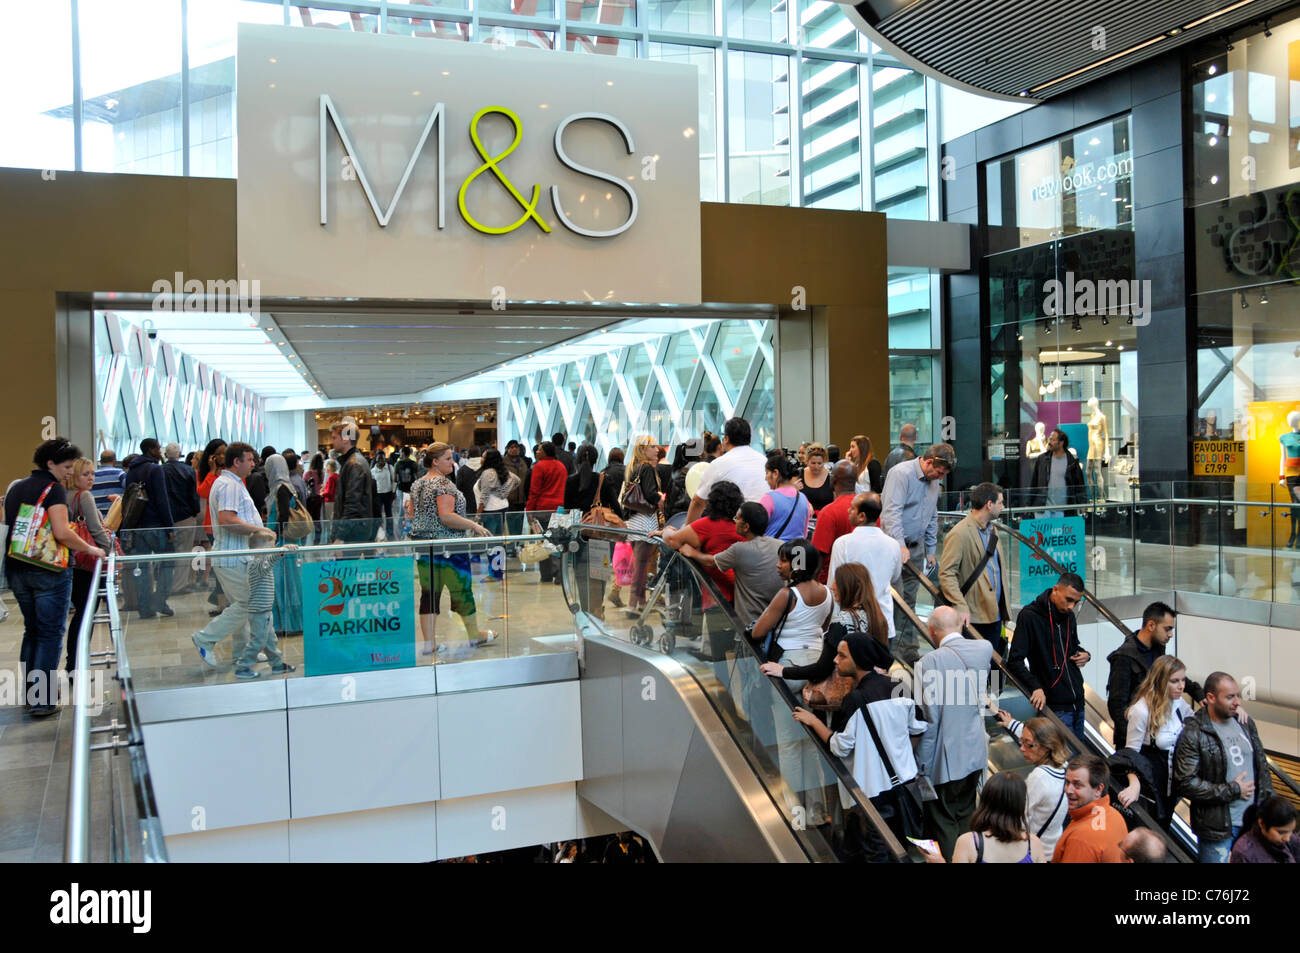 Shopping mall interior escalators giving access to M&S store at the Stratford City Westfield shopping centre London England UK Stock Photo